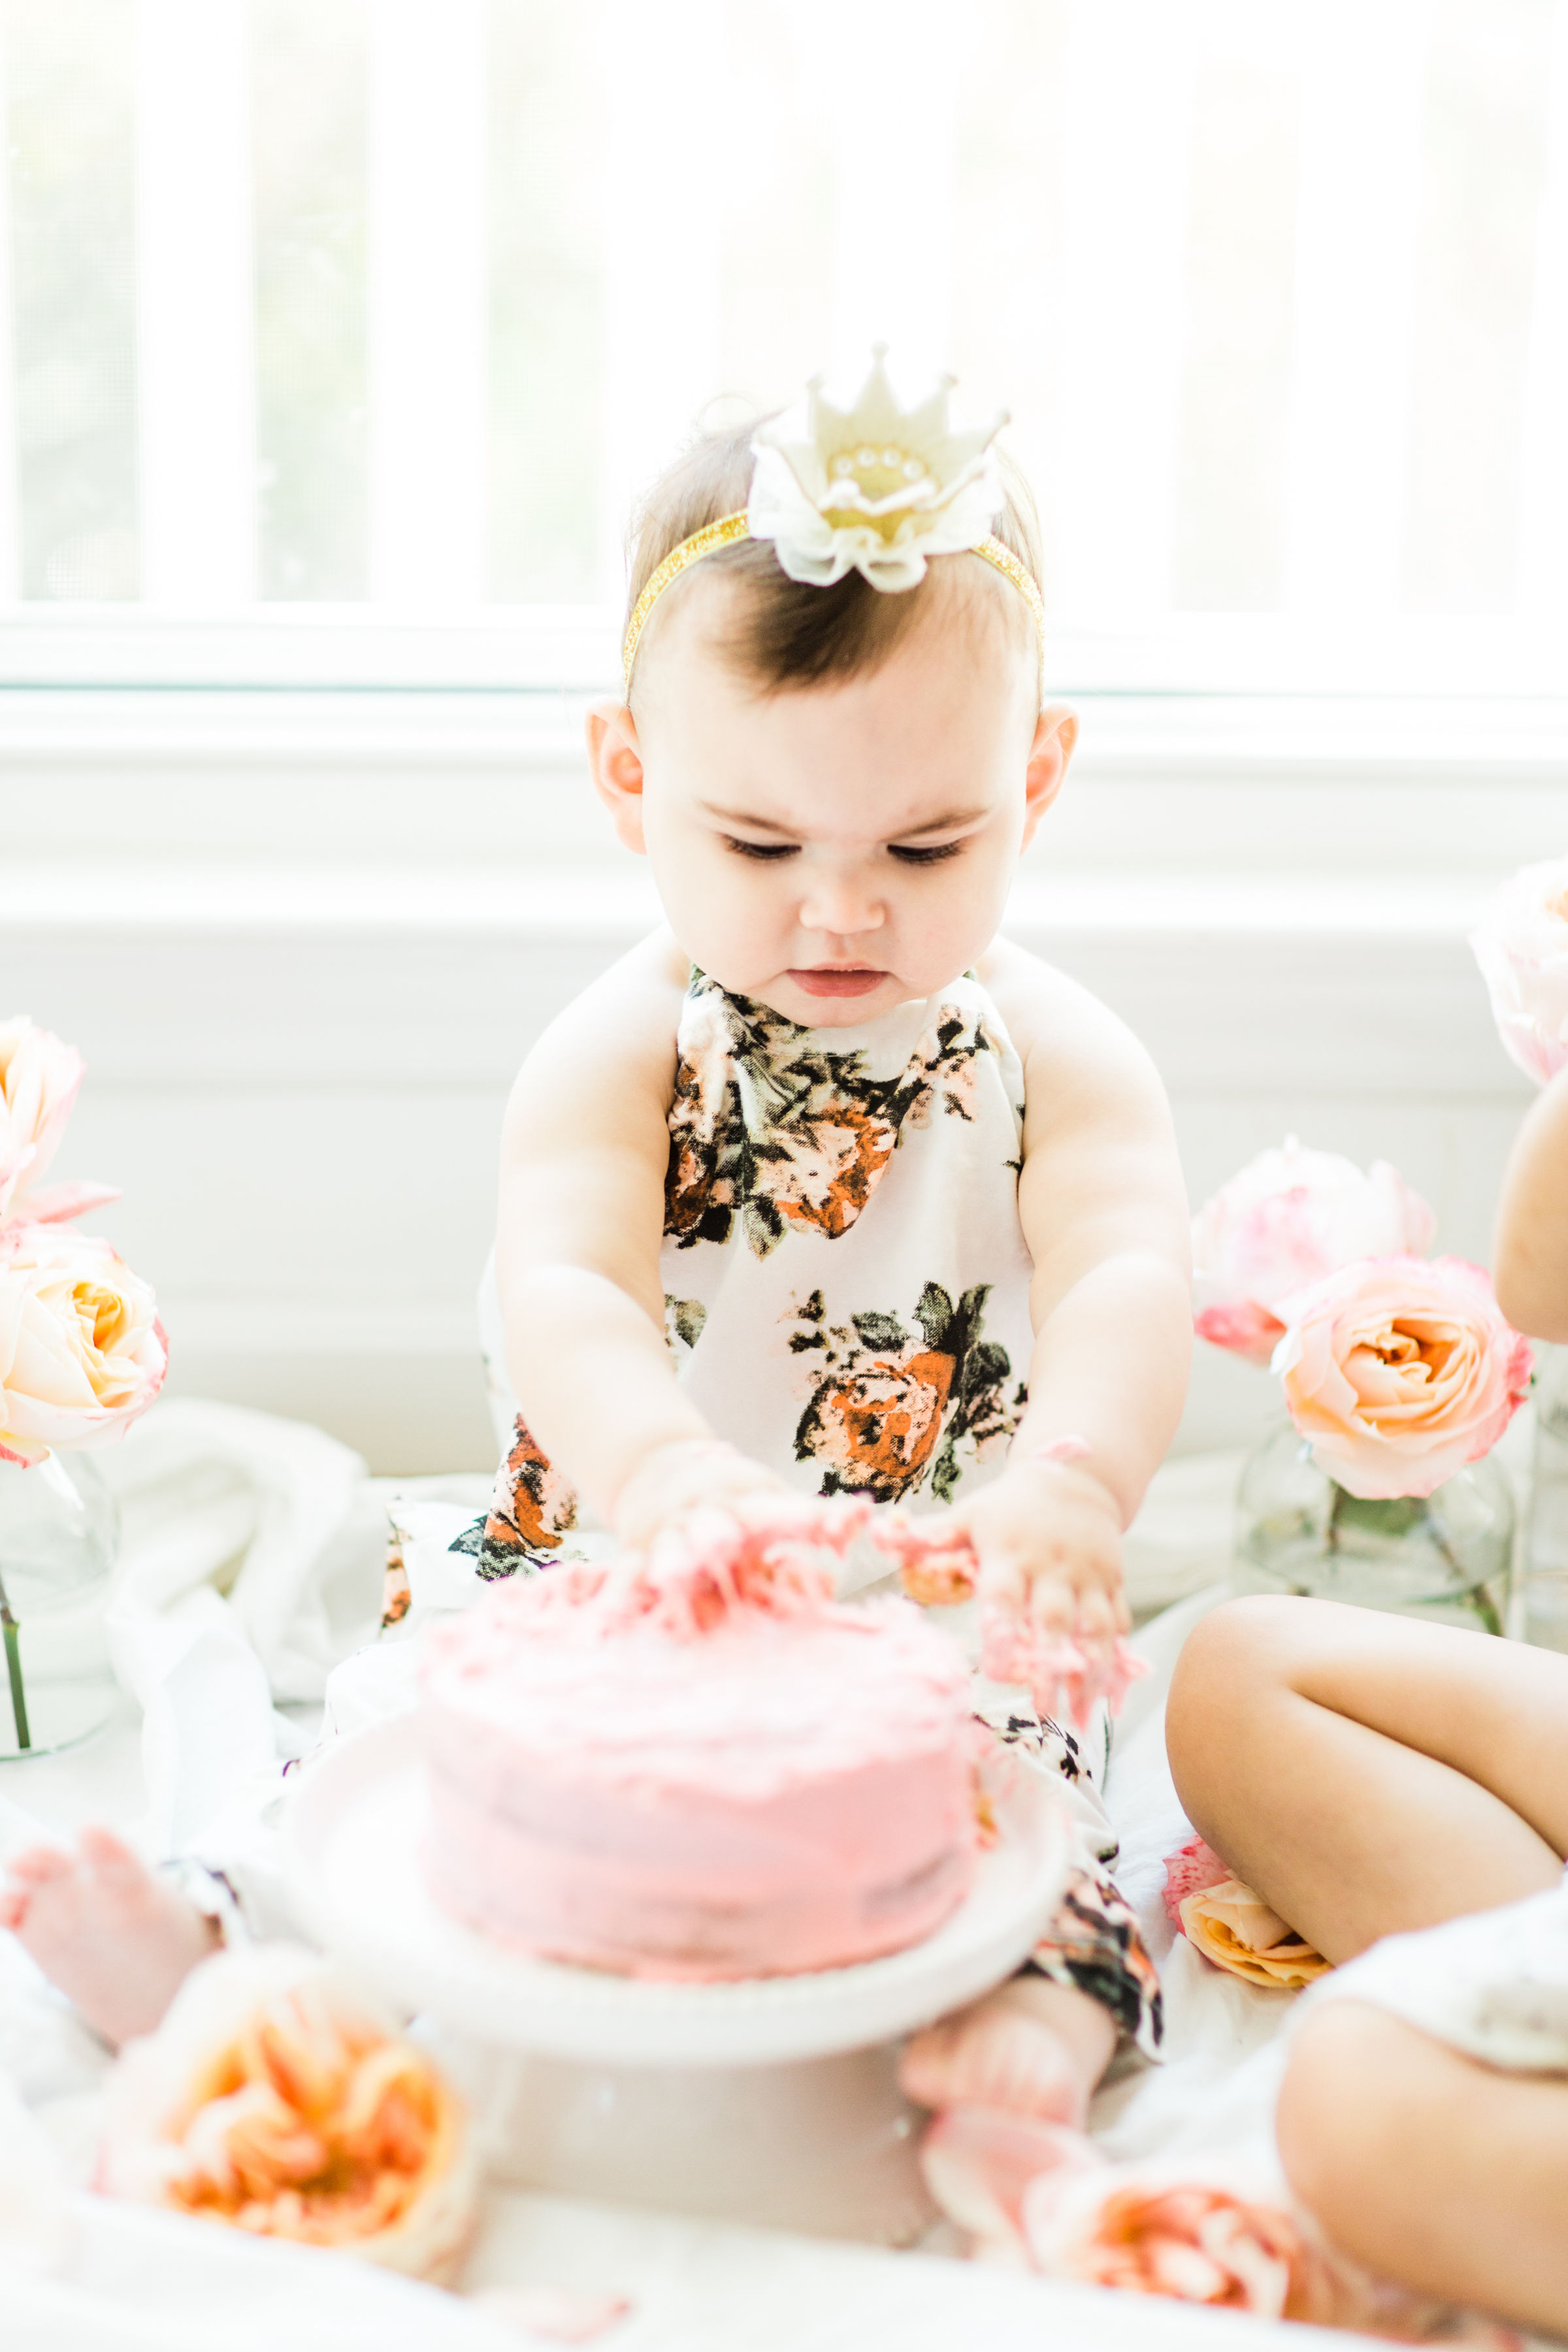 Looking for a little inspiration for baby's first birthday cake smash photo shoot? We're keeping it simple and adorable for Emmeline's cake smash, plus, we're sharing our favorite dairy-free vanilla crazy cake recipe! Click through for the details and #recipe. #firstbirthday #babybirthday #cakesmash #babycakesmash #cakesmashrecipe #firstbirthdaycake | glitterinc.com | @glitterinc